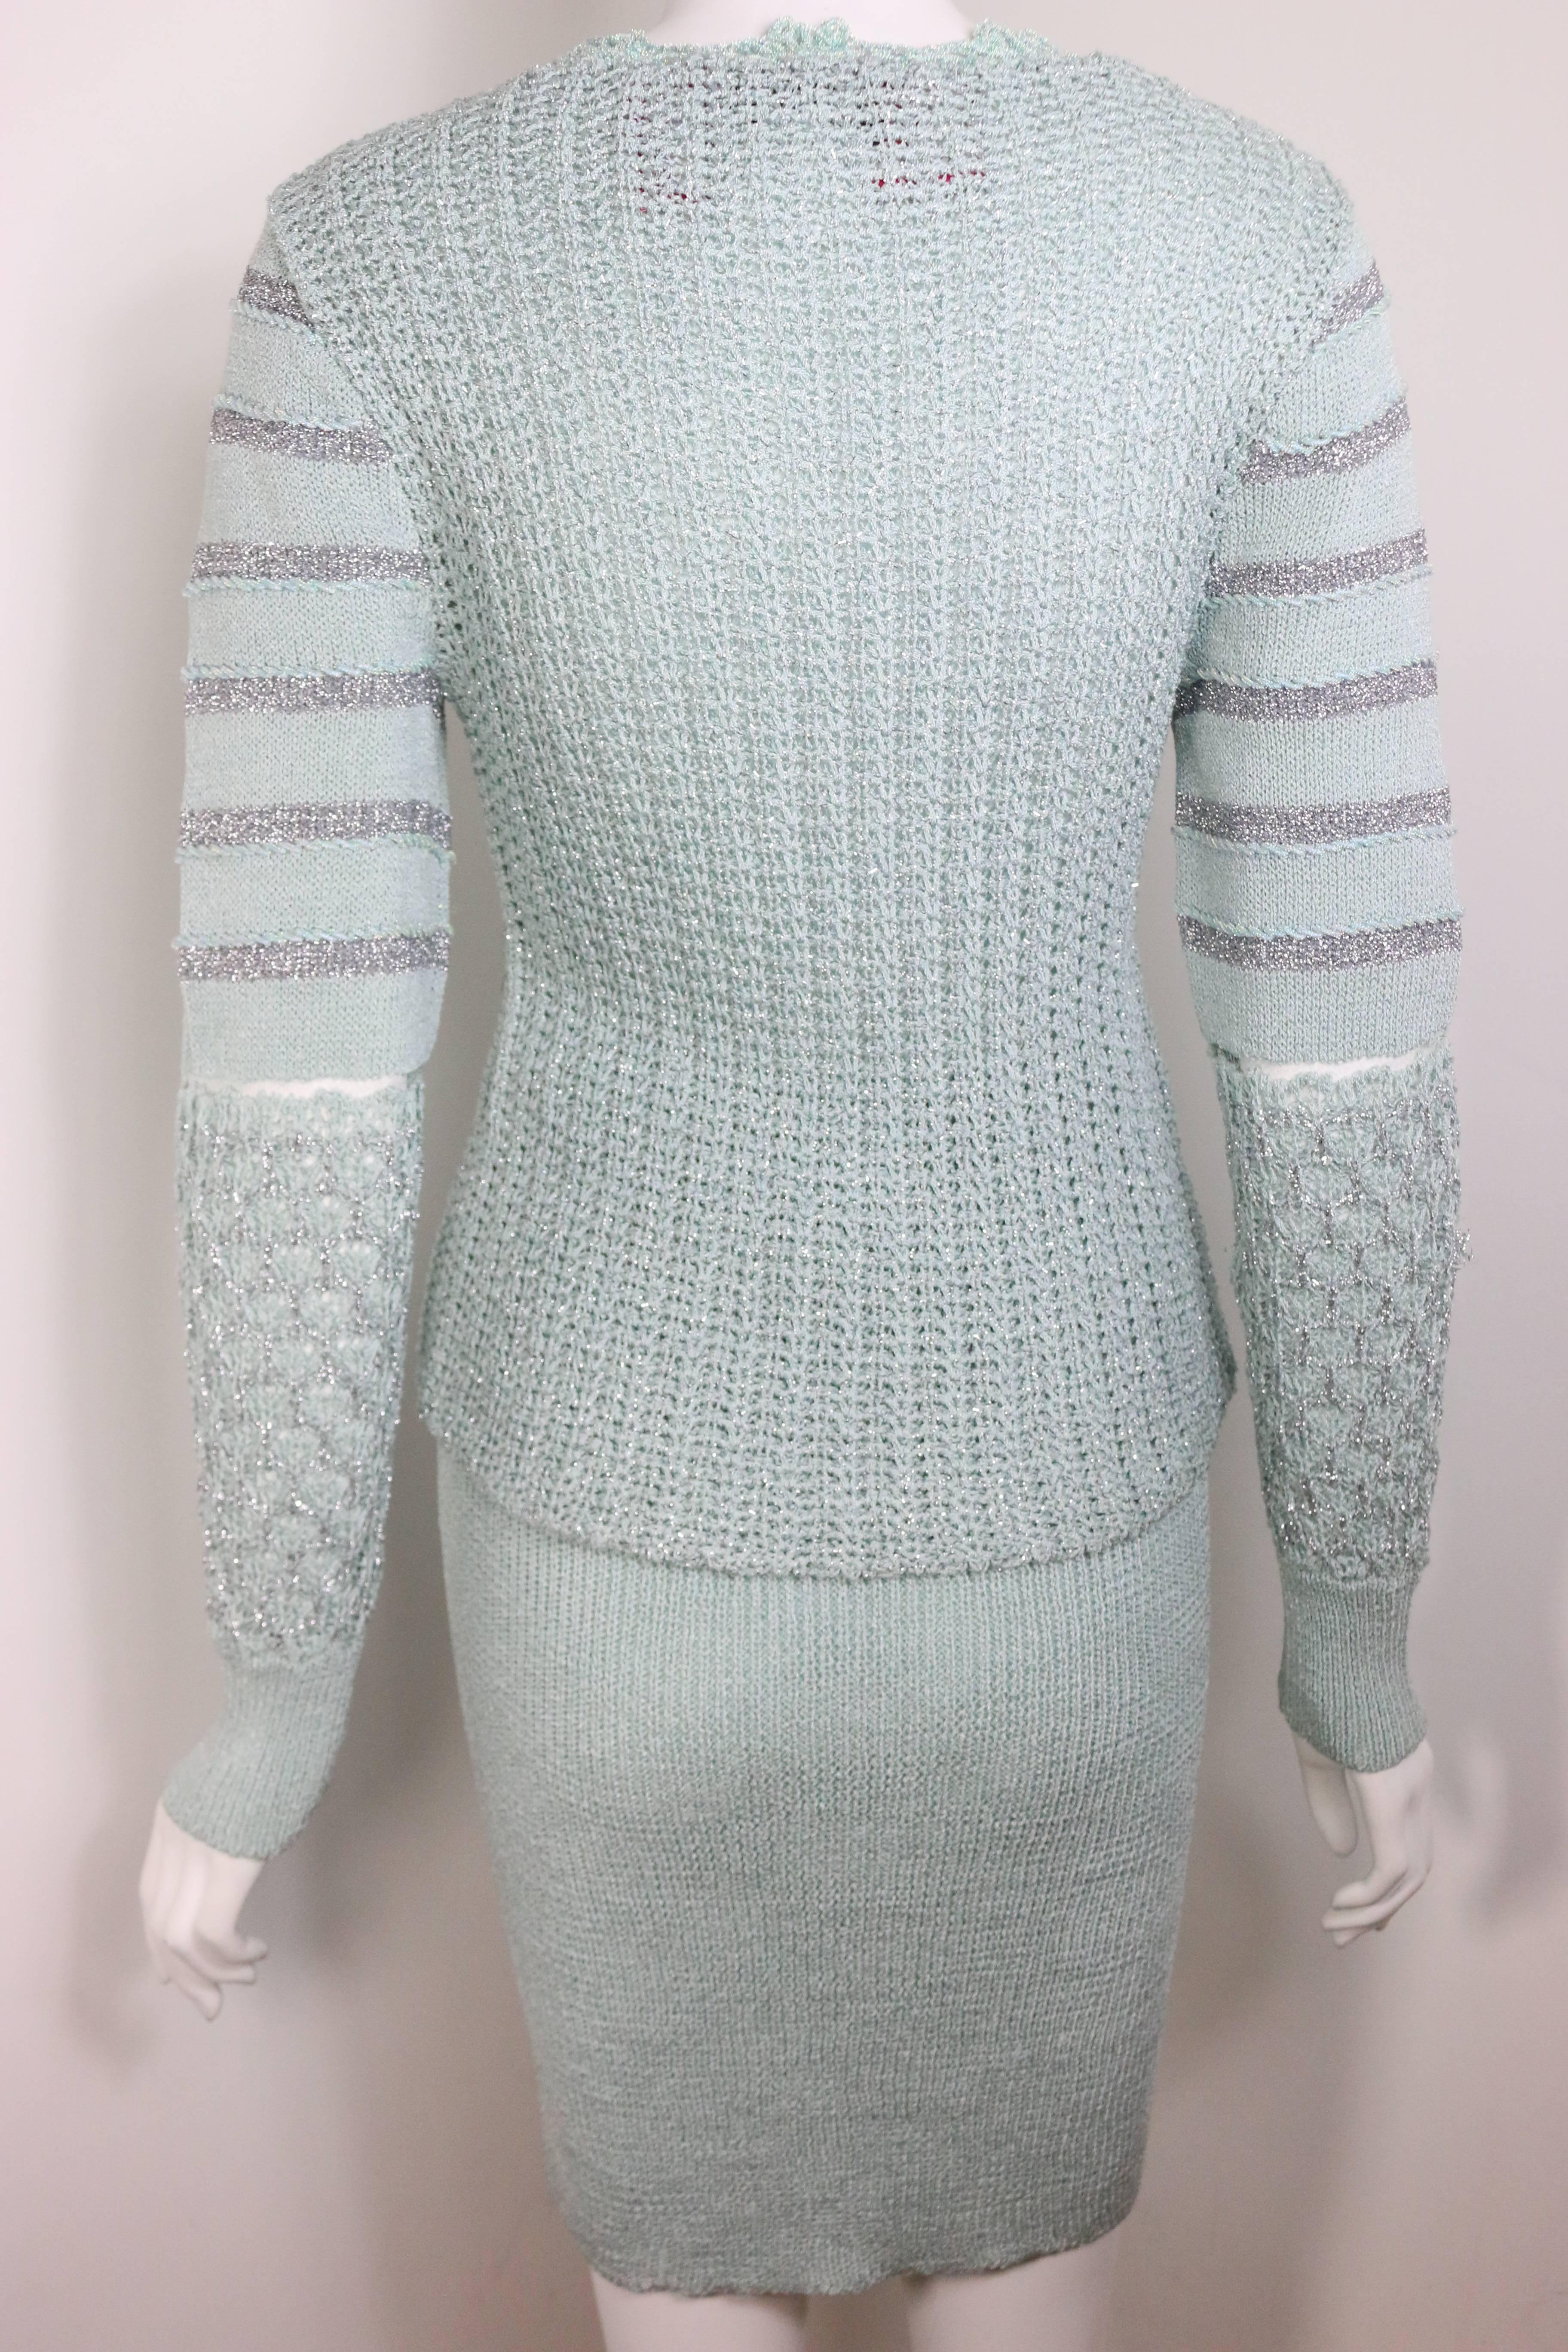 Christian Lacroix Mint Metallic Knitted Two Piece For Sale 1